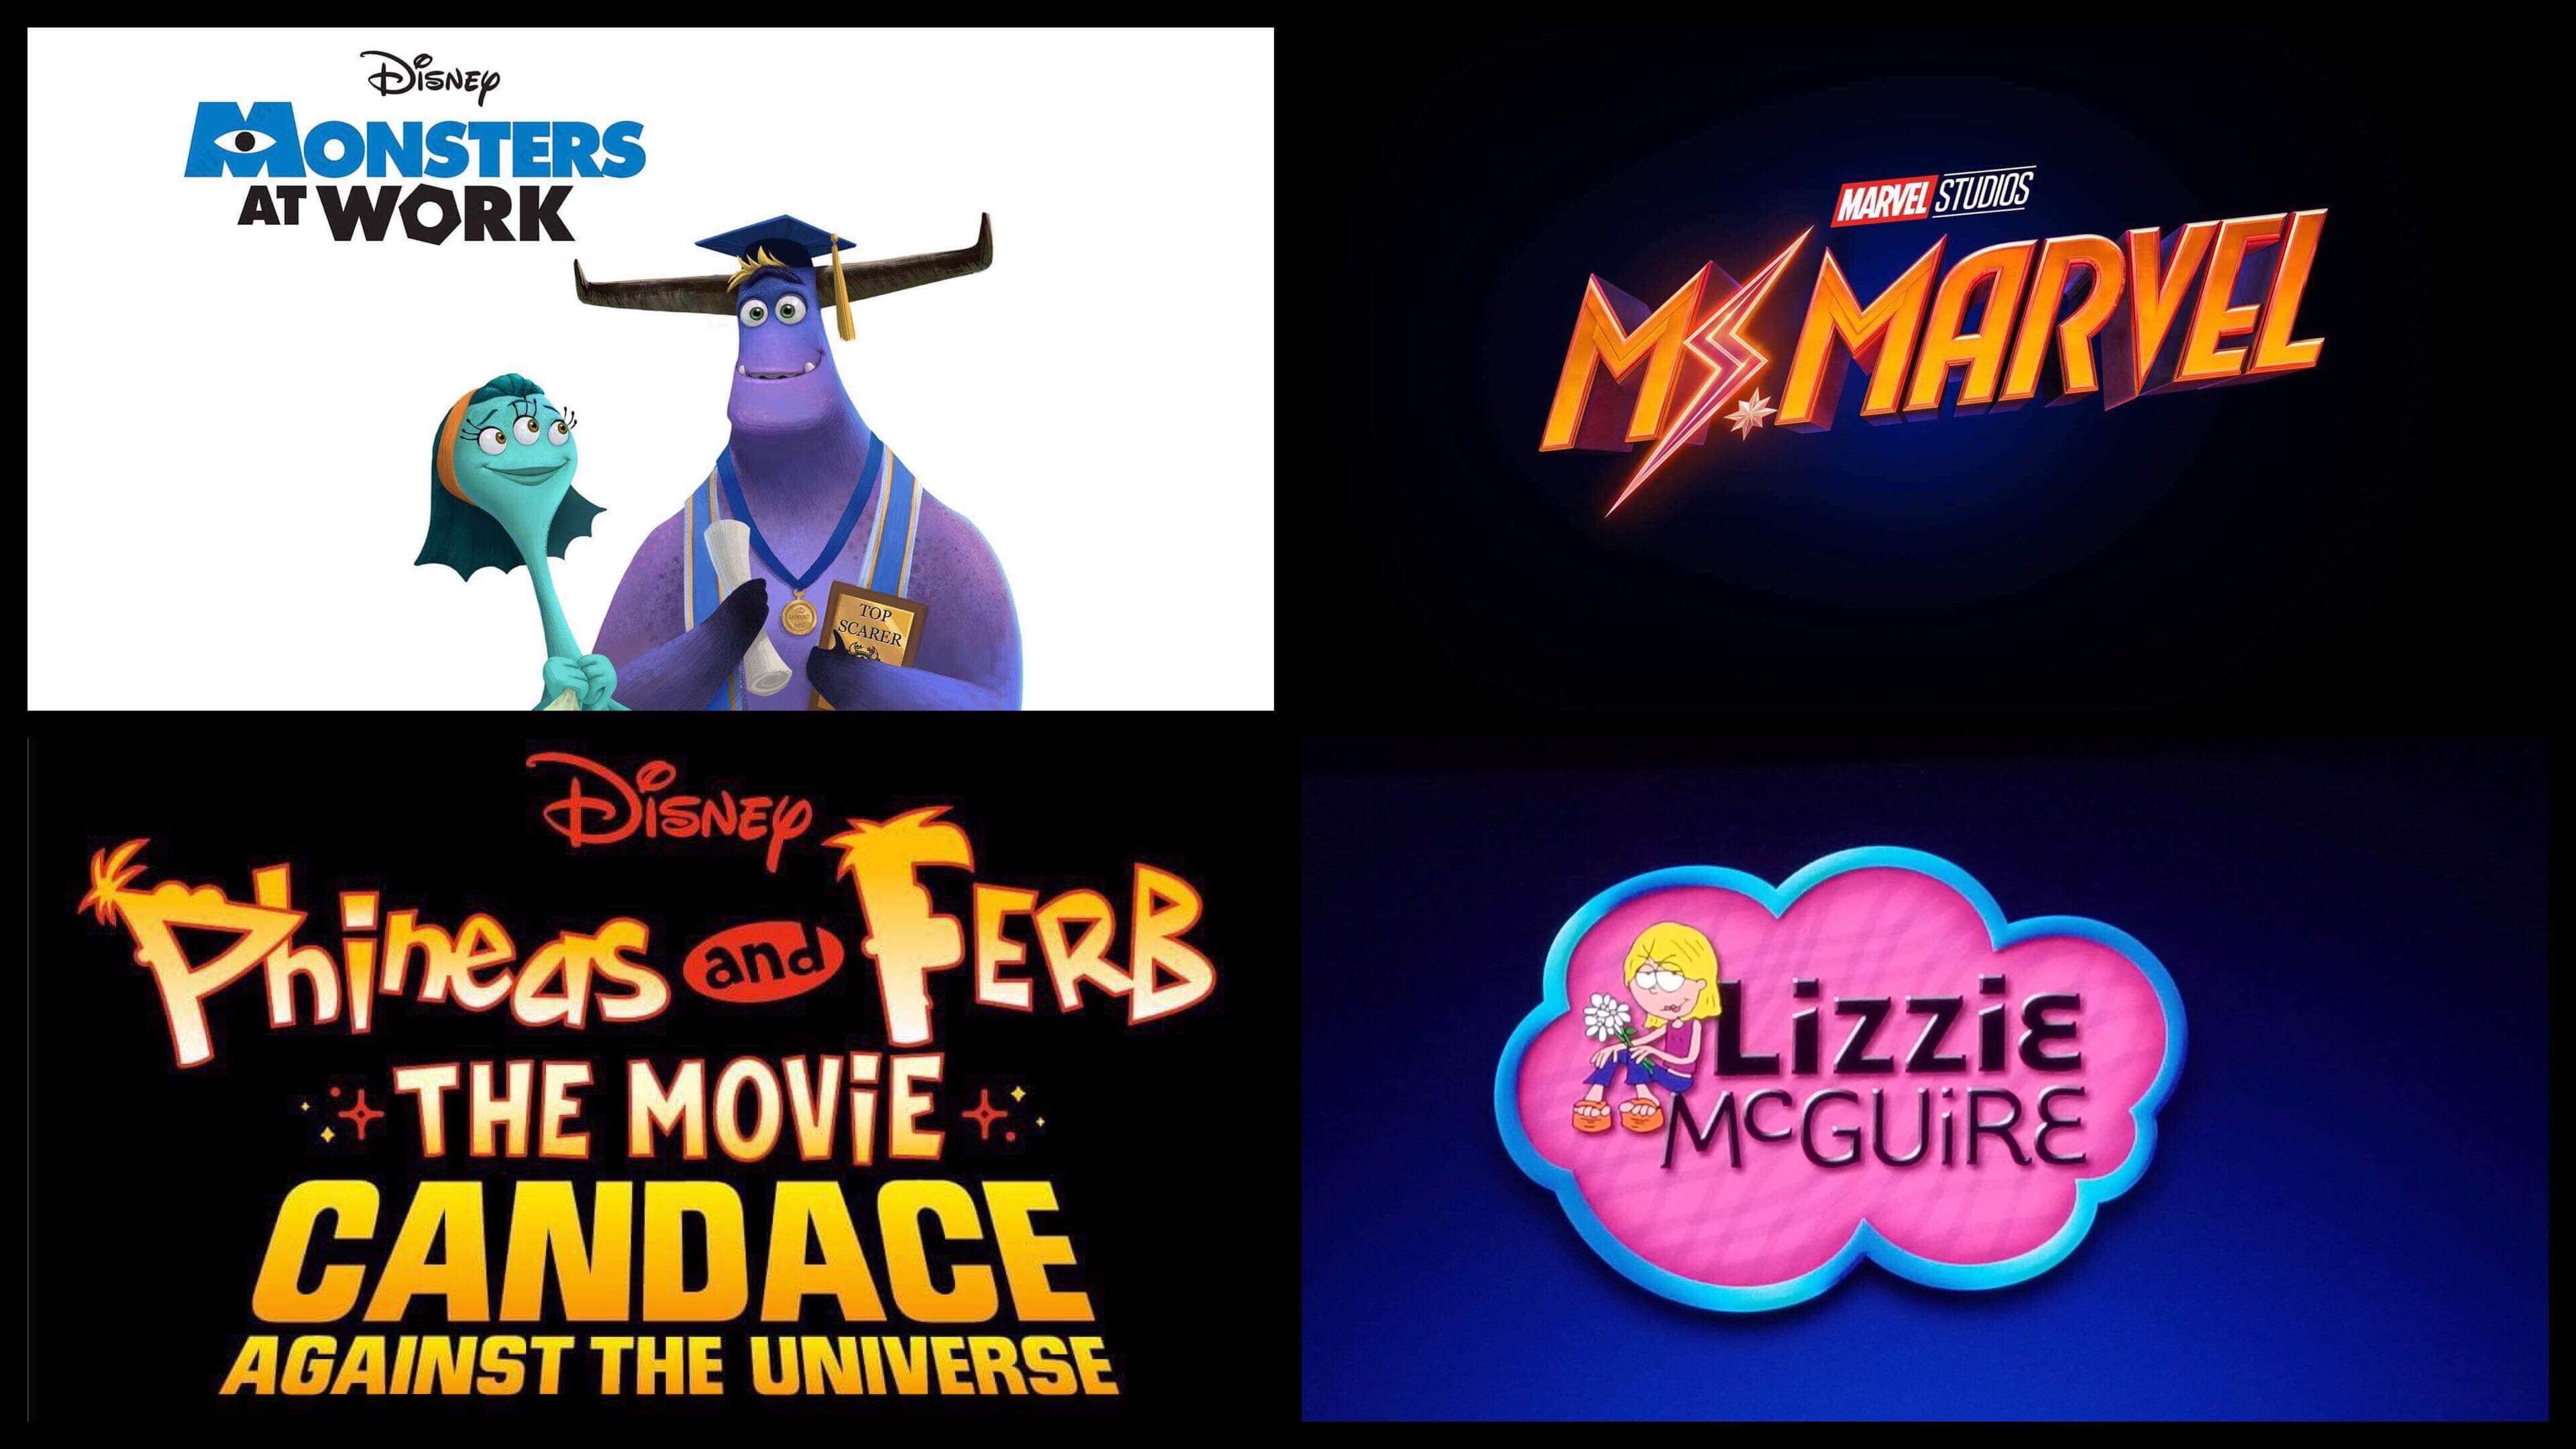 All The New Content Coming to Disney+ Announced at the 2019 D23 Expo